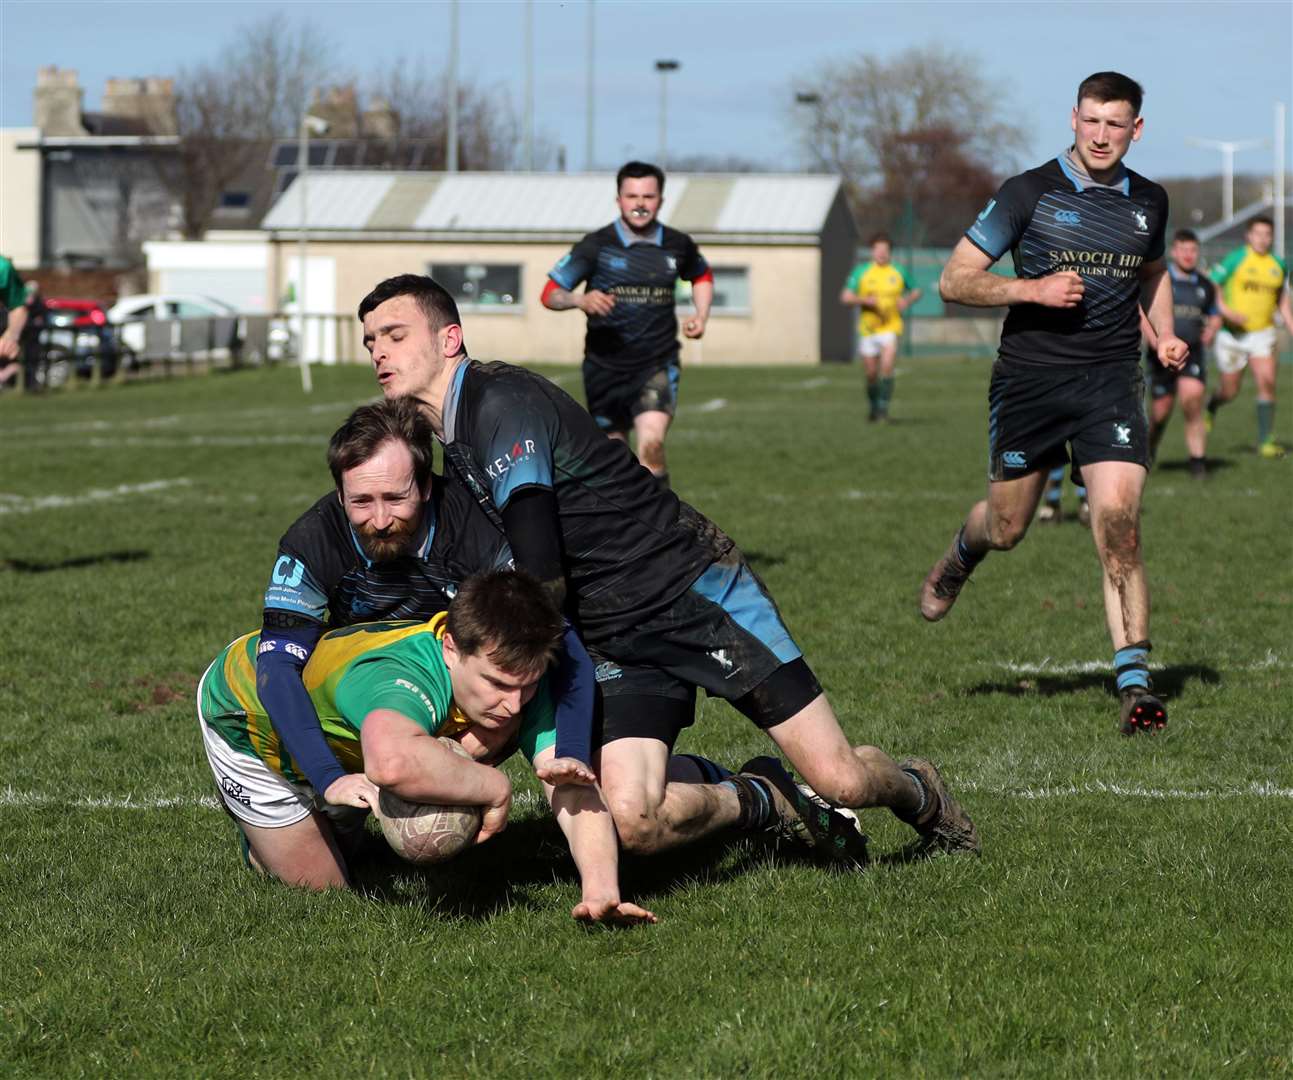 Stuart Crichton scores a try despite the efforts of two defenders during the Yellows' recent 48-22 victory over Fraserburgh at Millbank. Picture: James Gunn